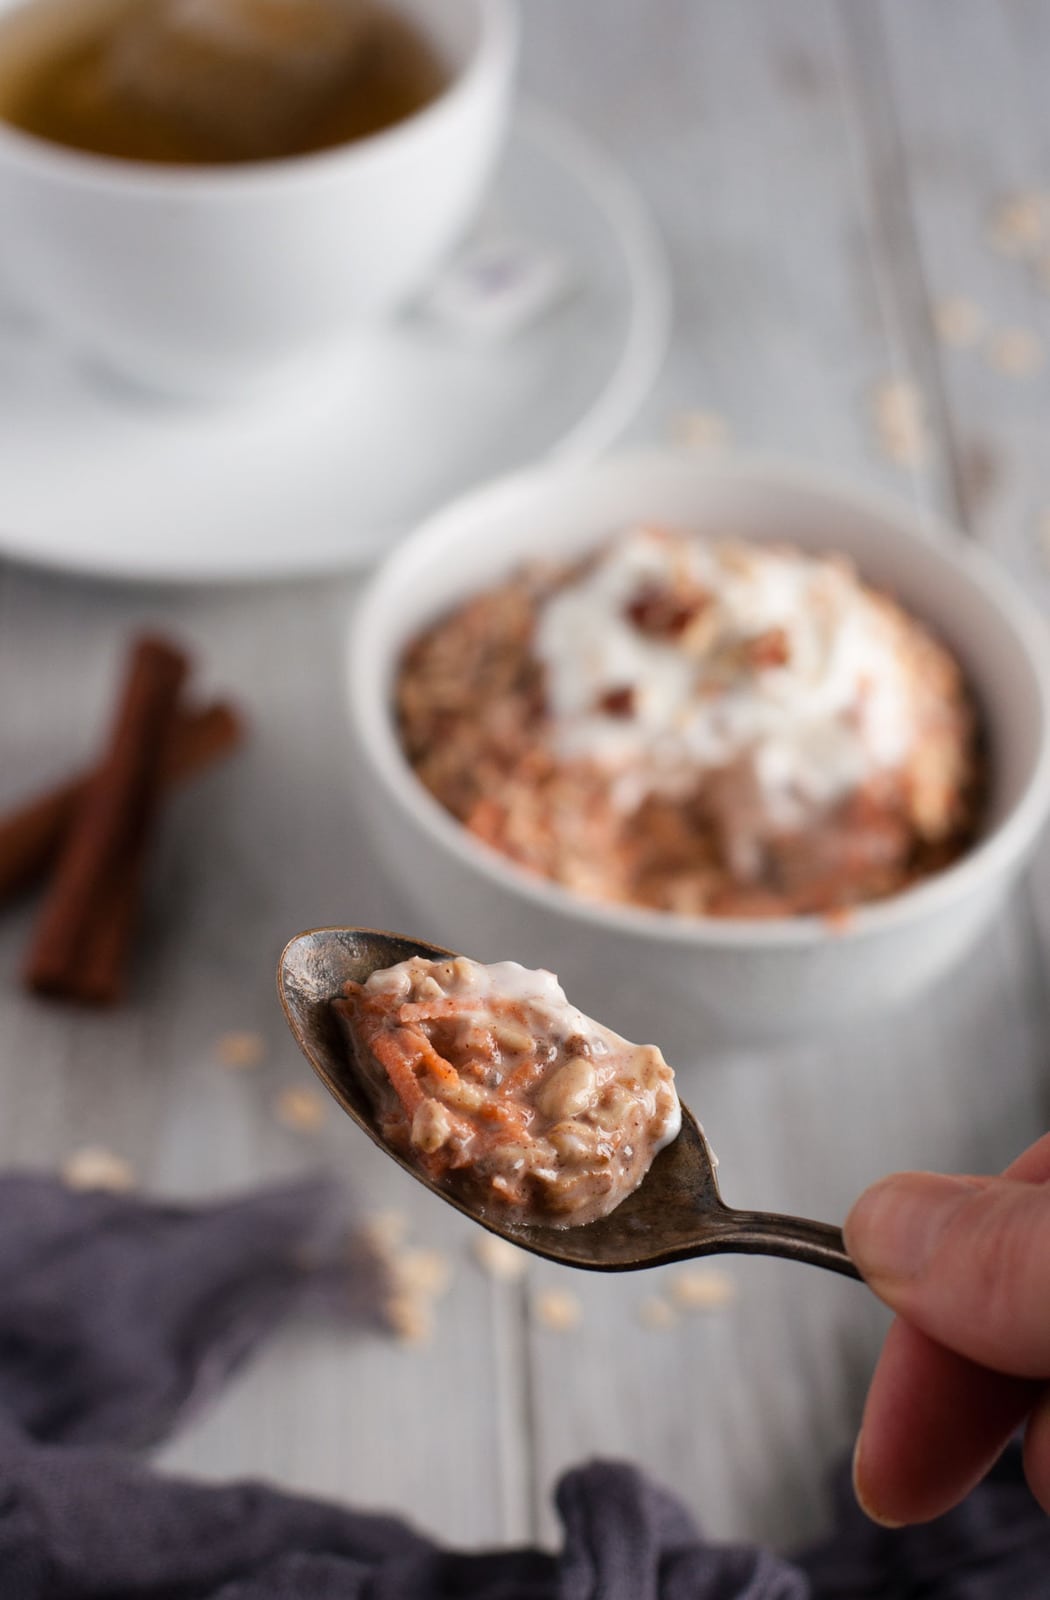 Carrot cake overnight oats are a healthy 350 calorie breakfast that tastes just enough like the favorite dessert to make breakfast seem like a treat. 